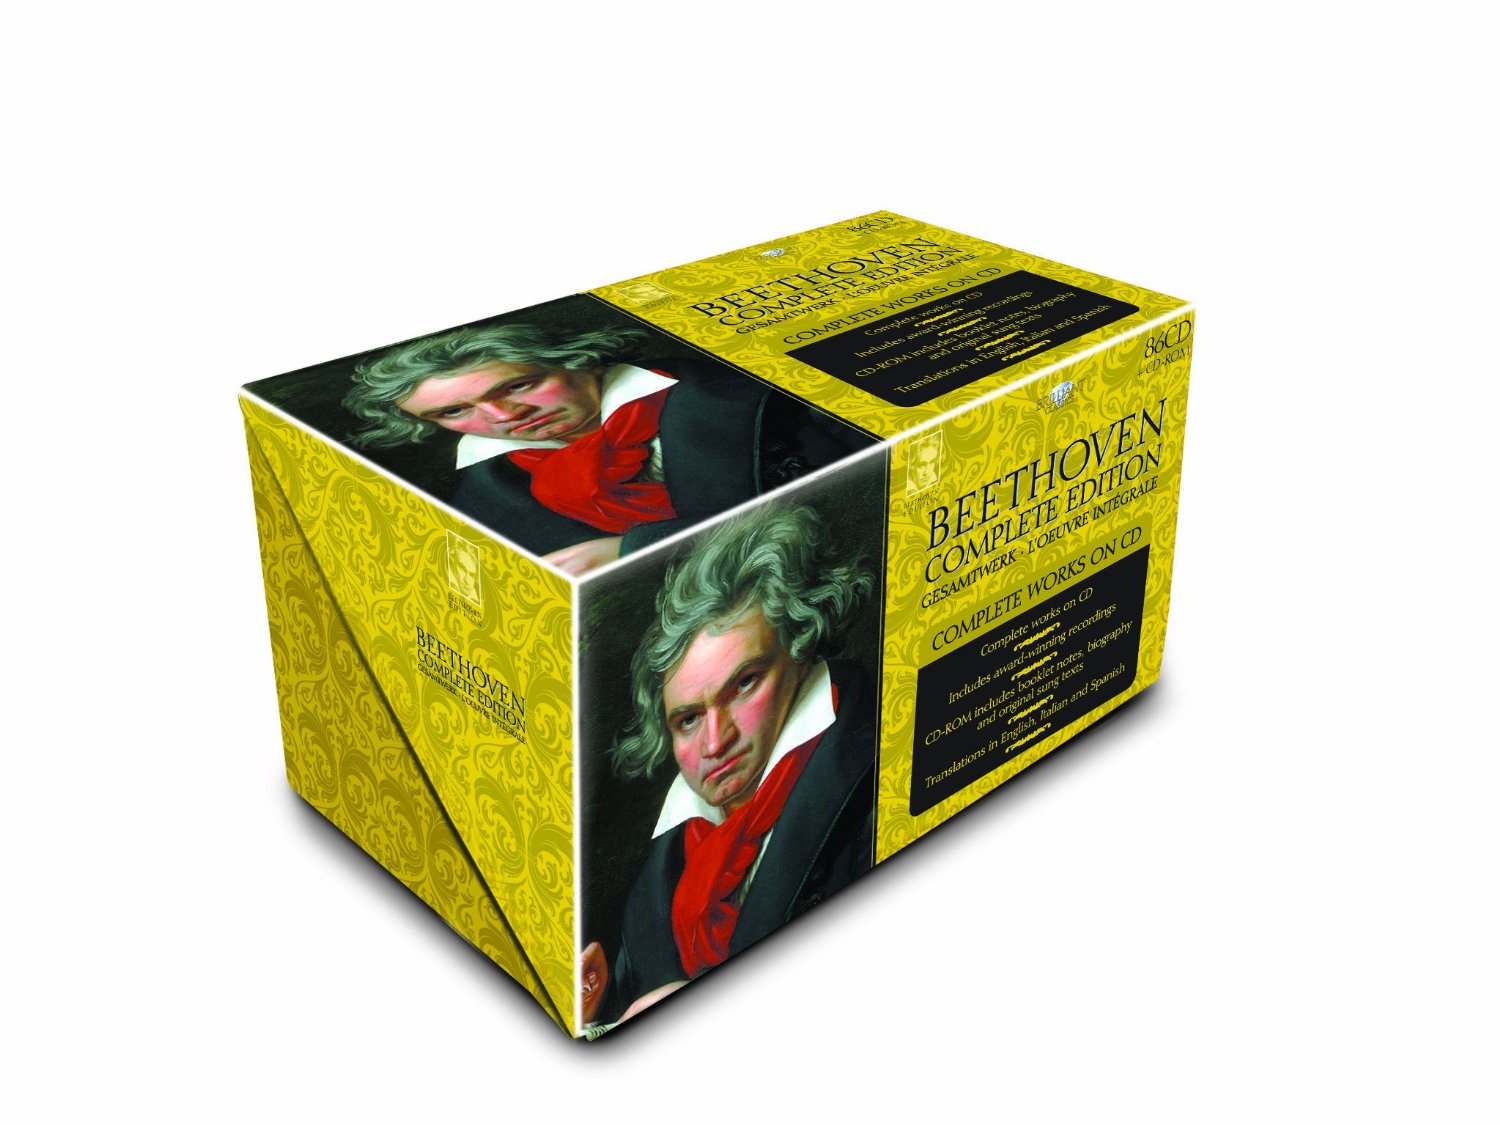 Torrent beethoven complete edition box